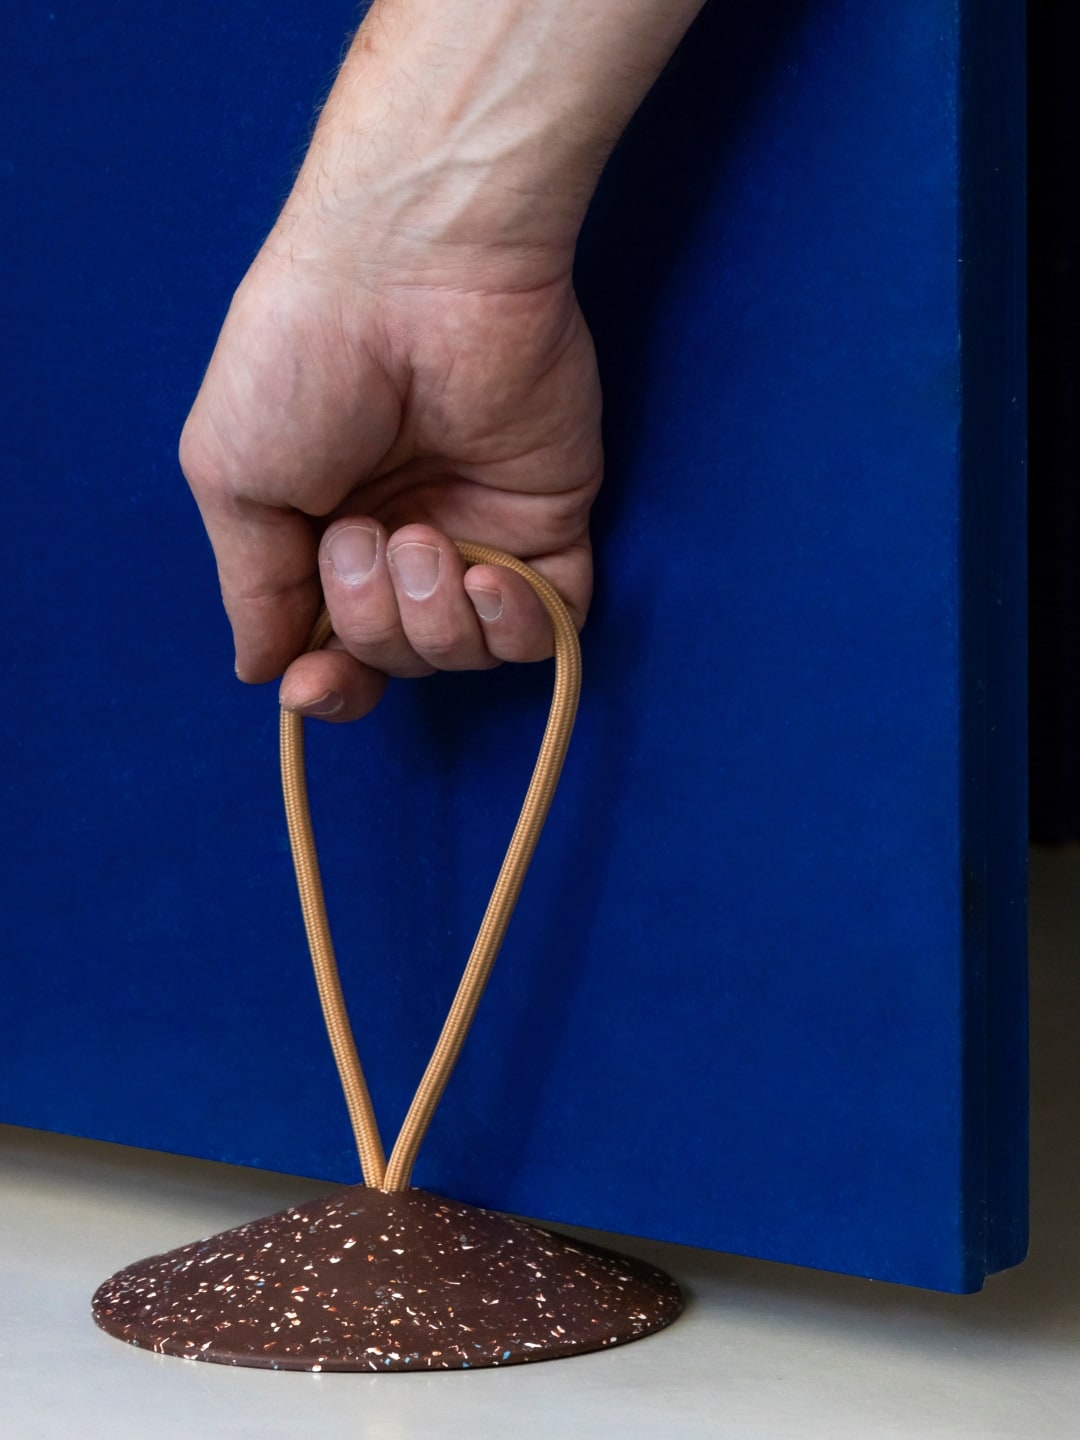 A hand is holding a STOP - Doorstop on a blue surface.